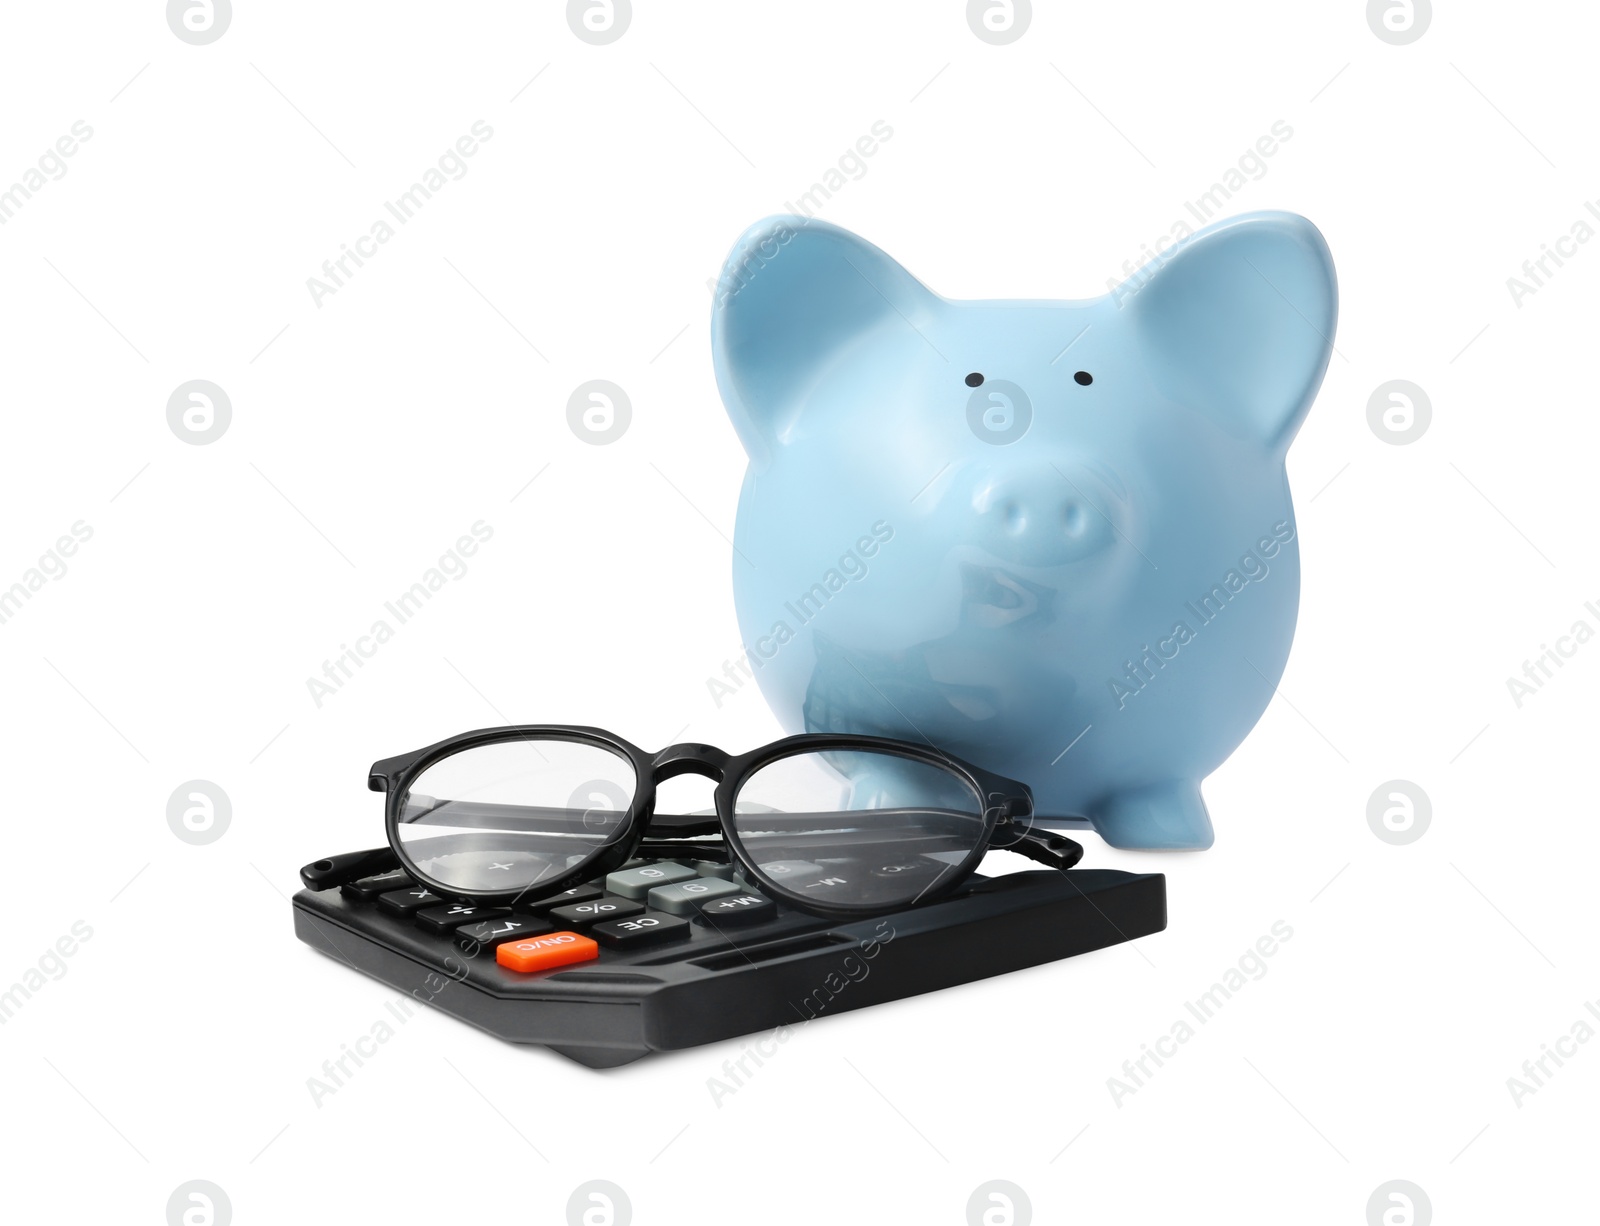 Photo of Calculator, glasses and piggy bank isolated on white